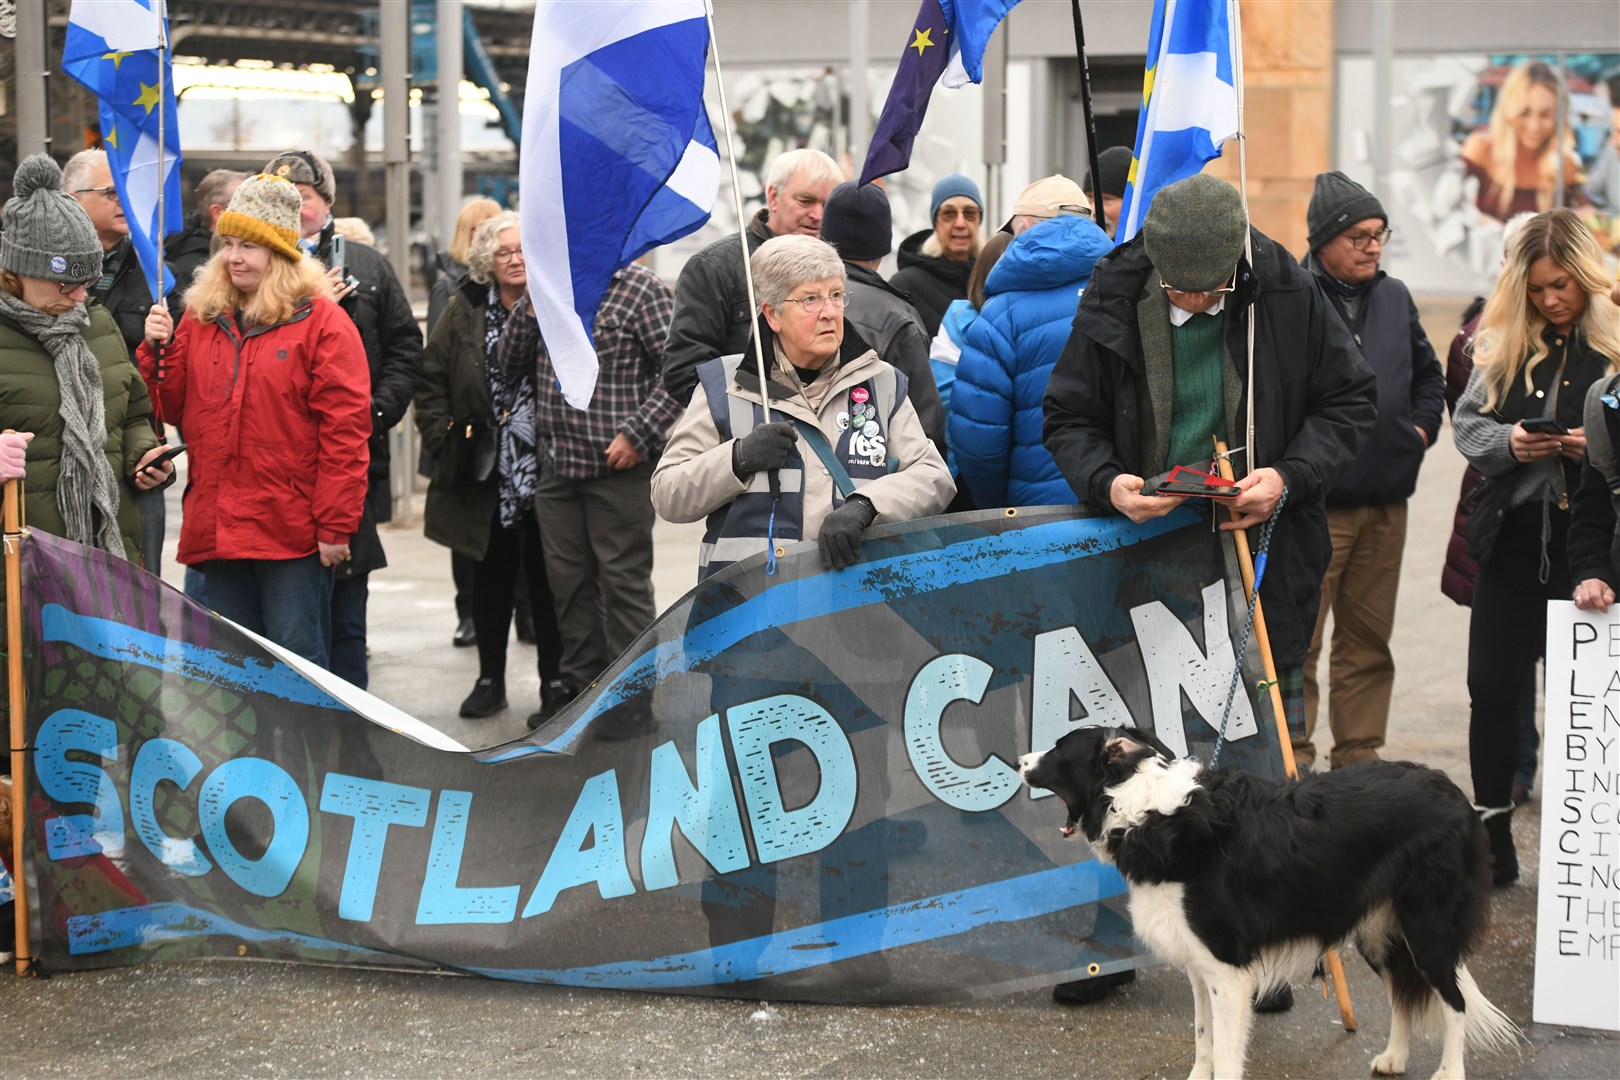 Scotland can. Picture: James Mackenzie